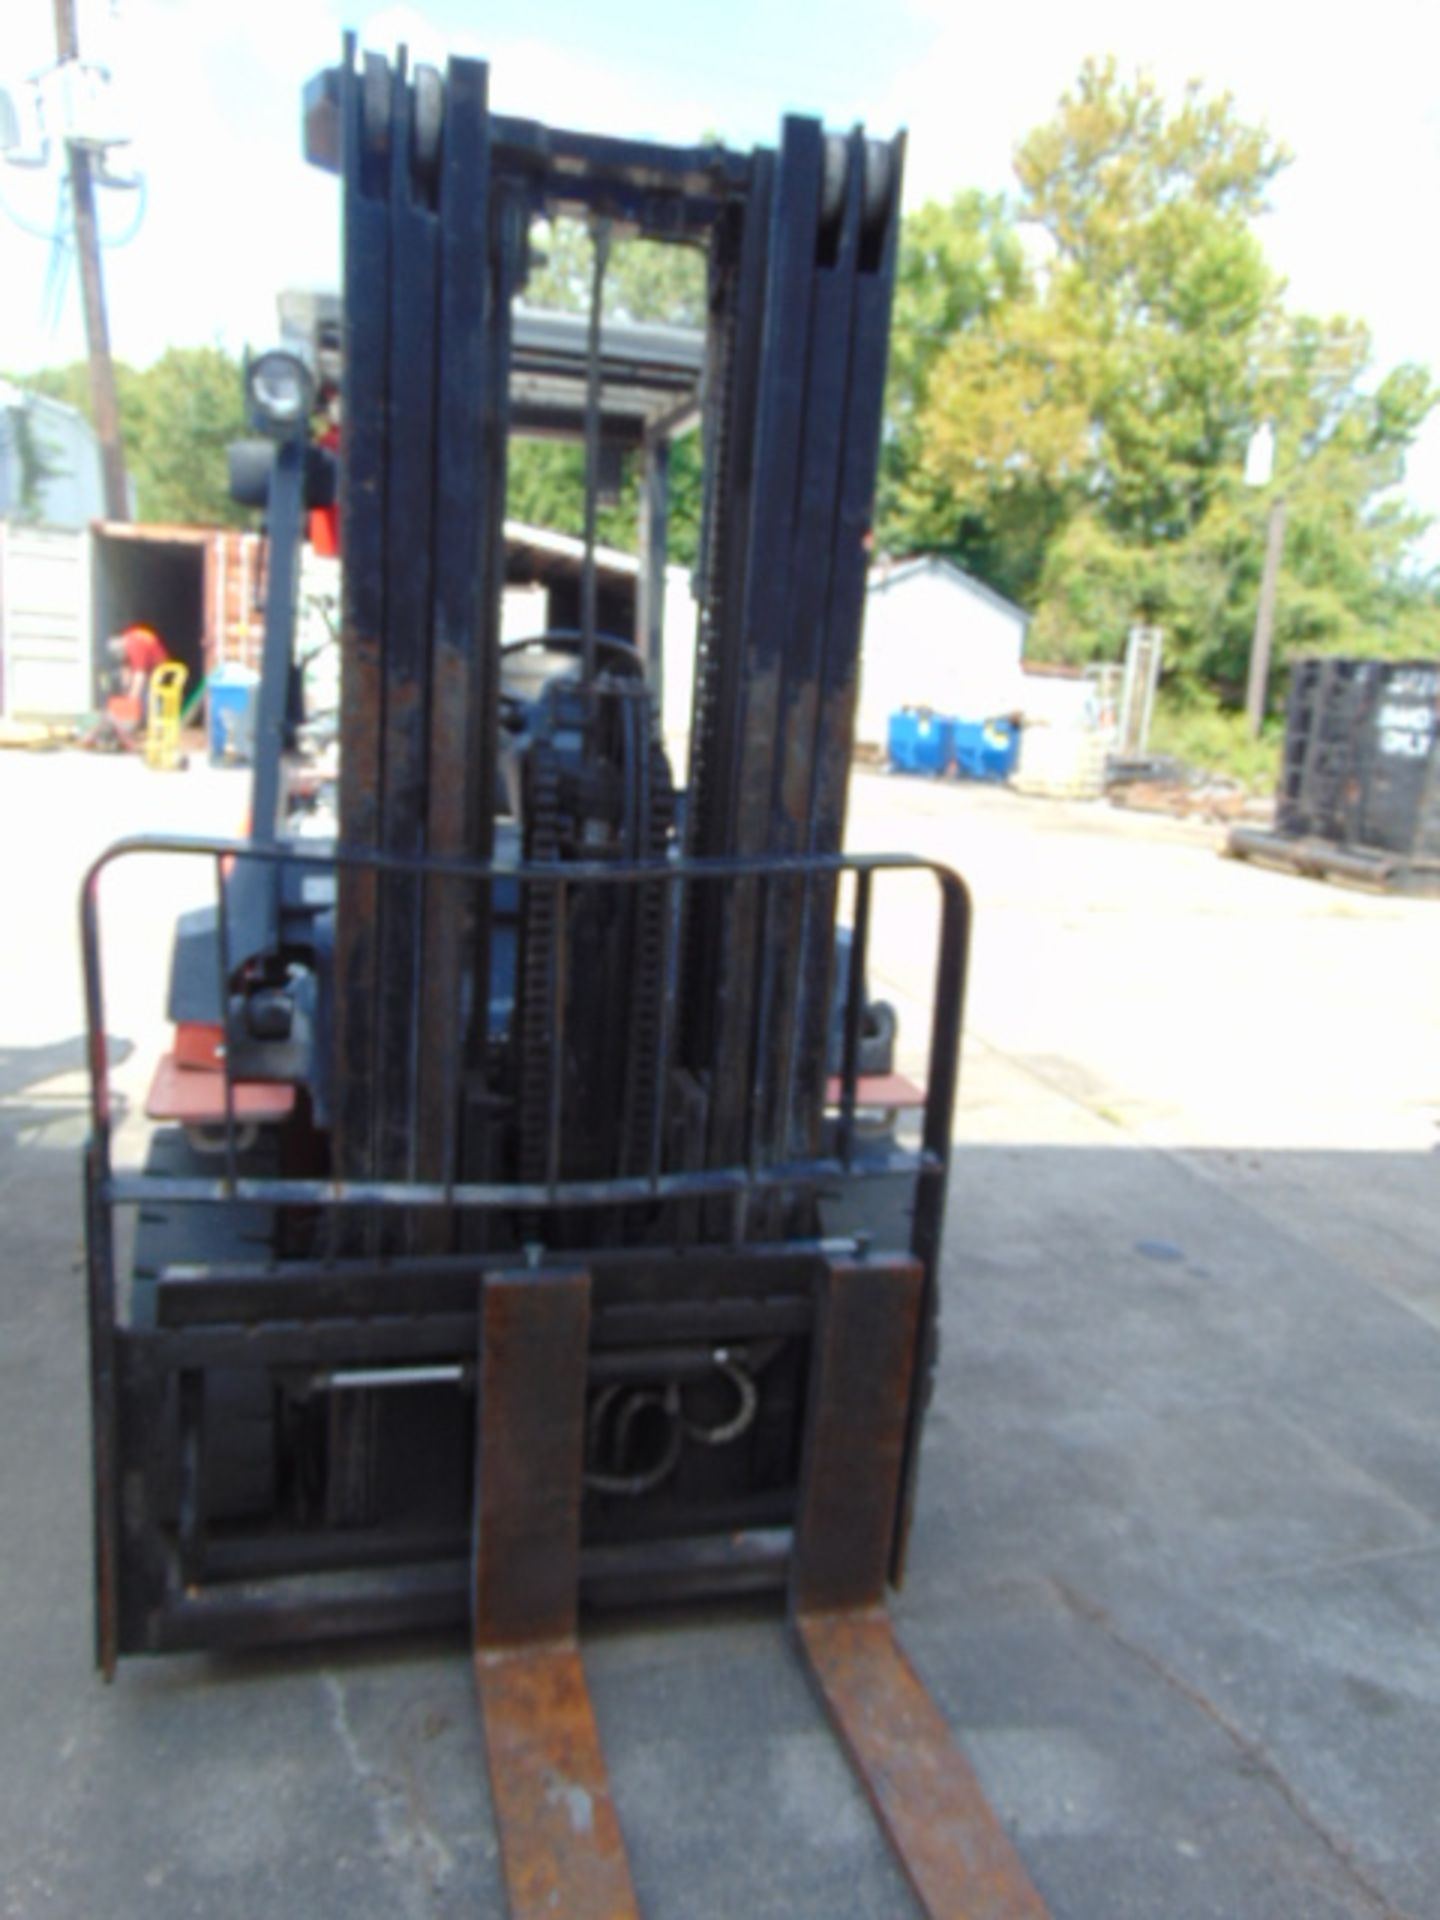 FORKLIFT, TOYOTA 8,000 BASE CAP. MDL 7FGU35, new 2014, LPG, 189" max. lift ht., 90" triple stage - Image 3 of 7